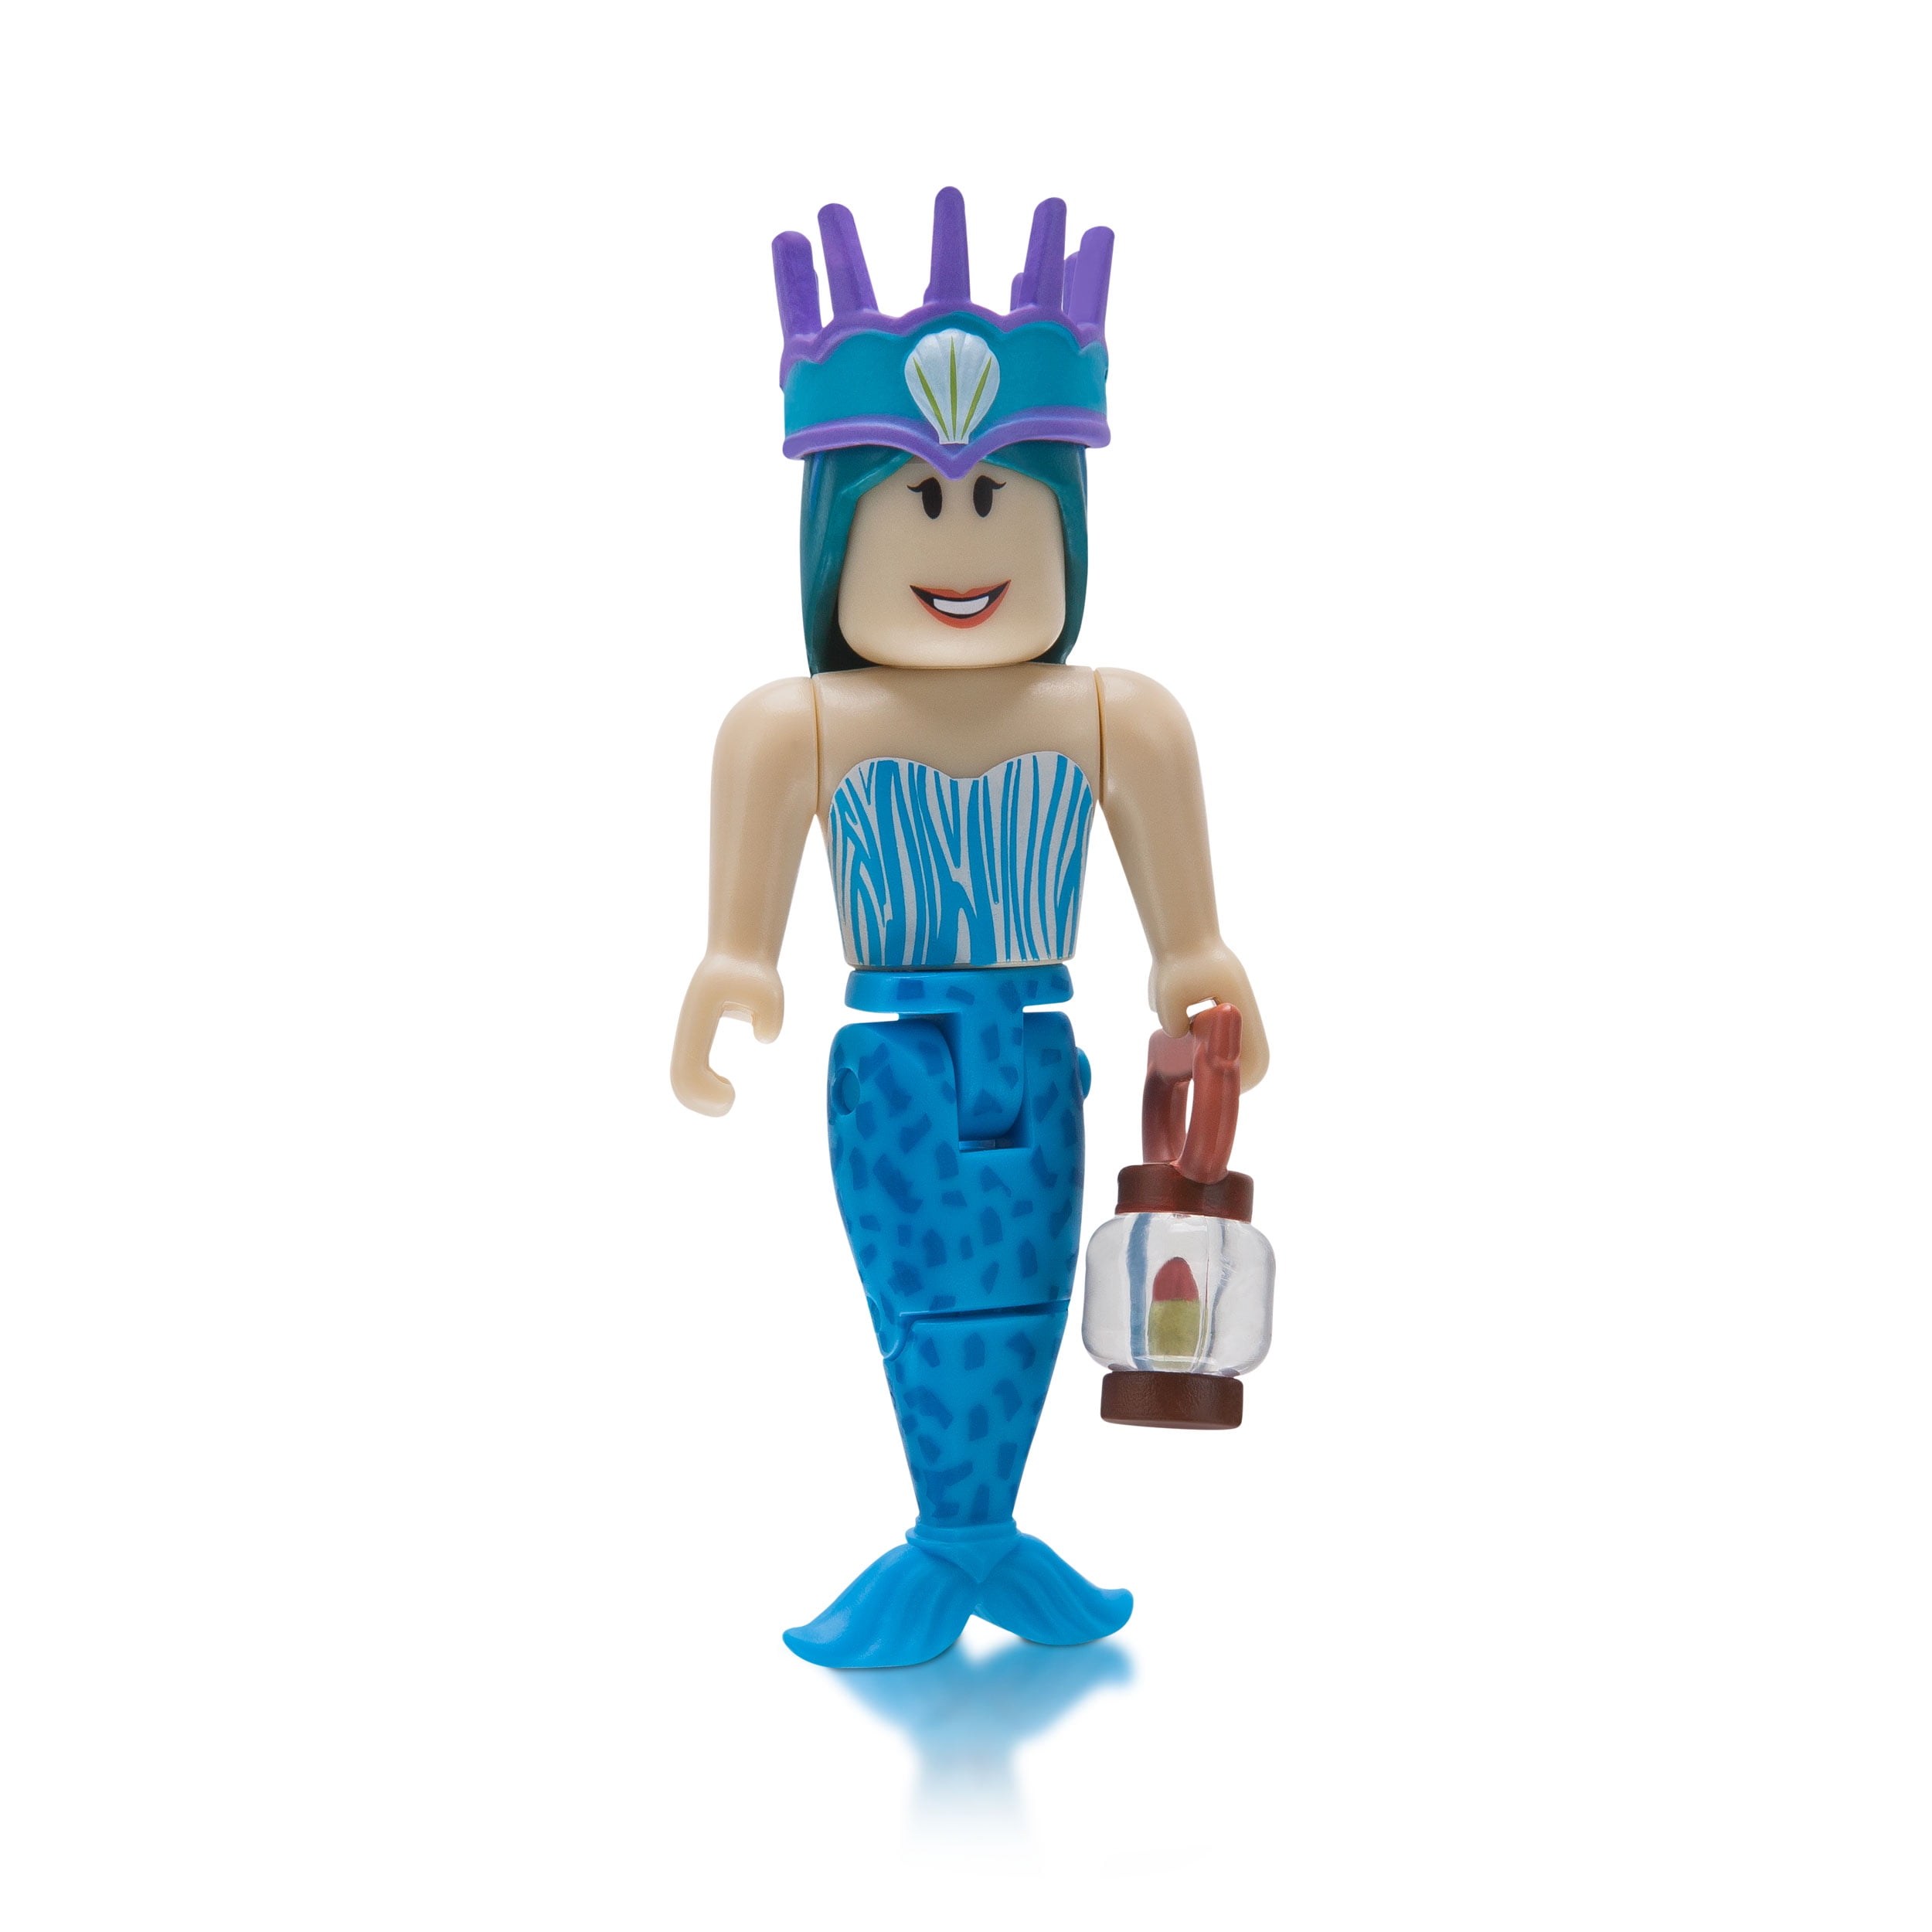 Roblox Celebrity Collection Neverland Lagoon Crown Collector Figure Pack Includes Exclusive Virtual Item Walmart Com Walmart Com - roblox celebrity royale high school enchantress figure pack walmartcom